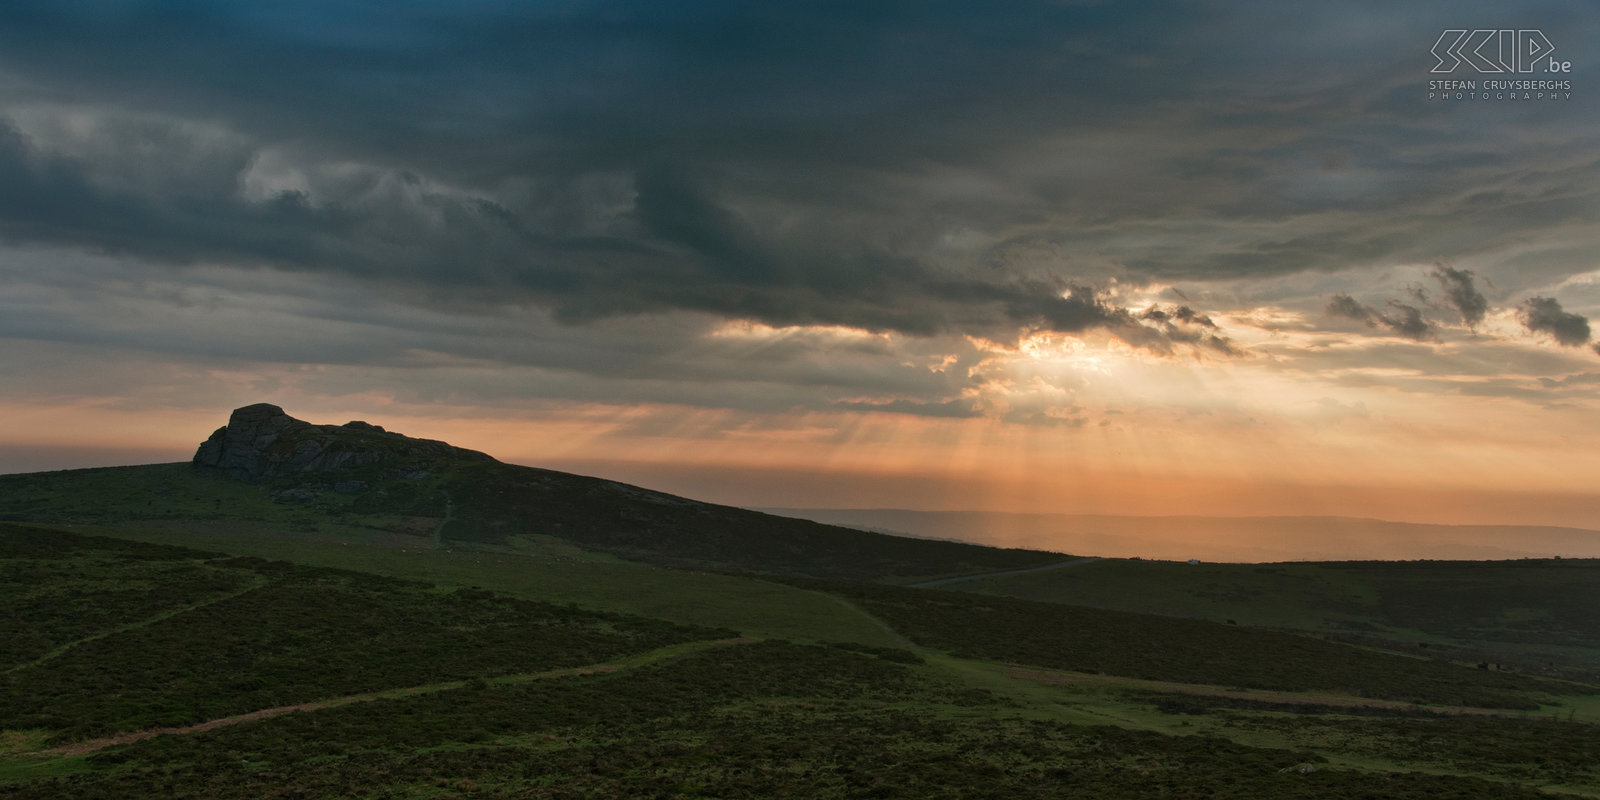 Dartmoor - Saddle Tor The sun is hided behind dark clouds at Saddle Tor. Stefan Cruysberghs